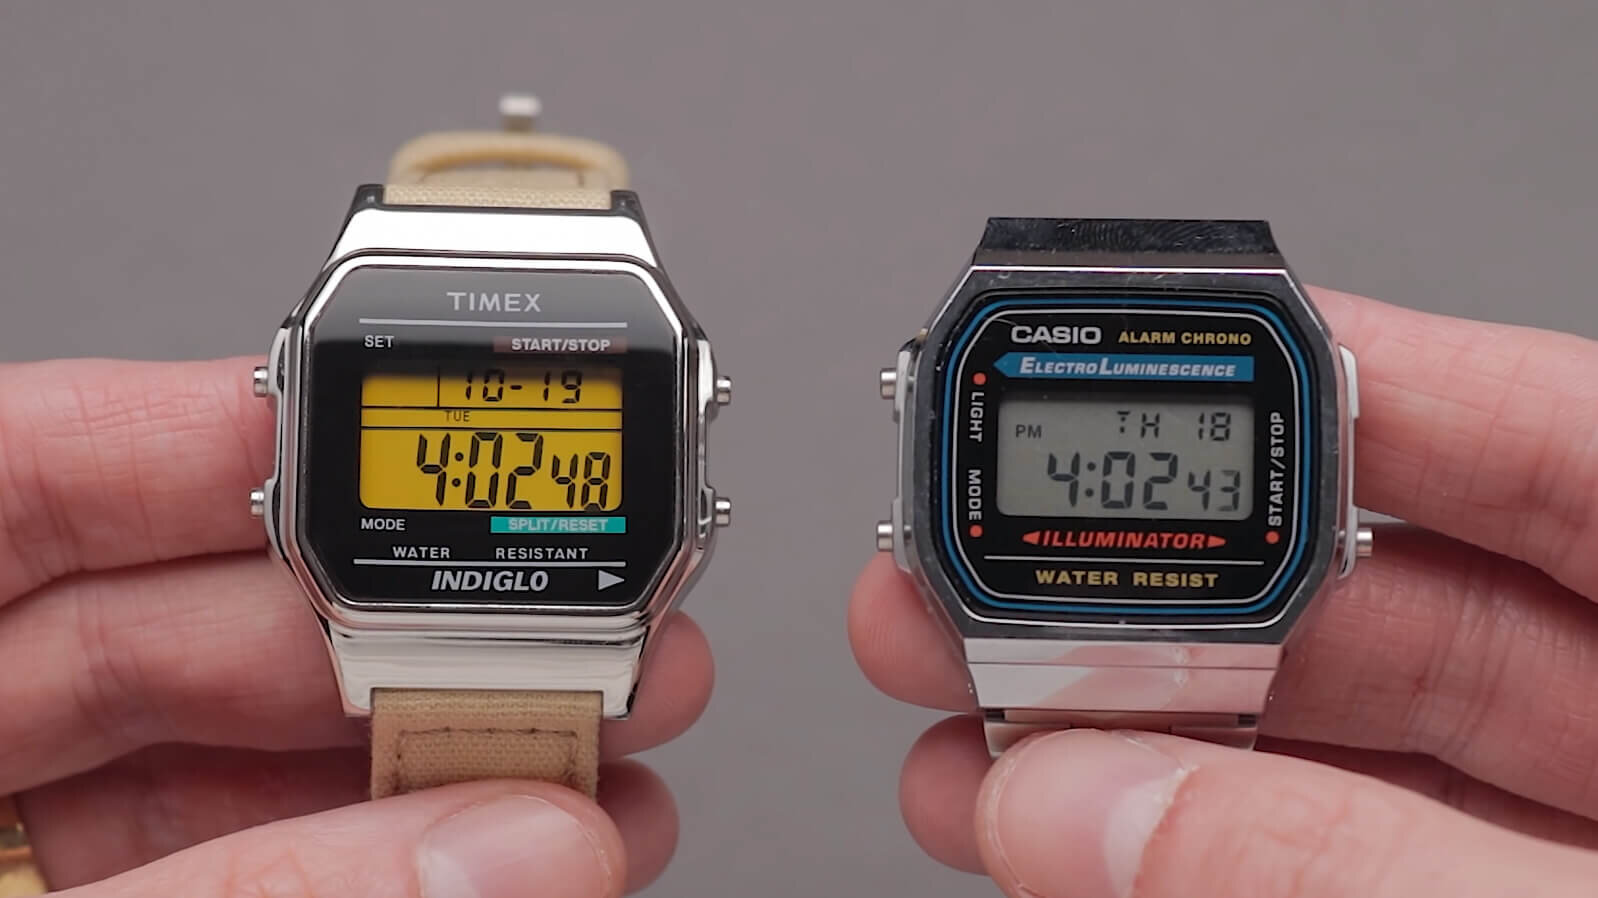 How To Make A Casio Watch Silent